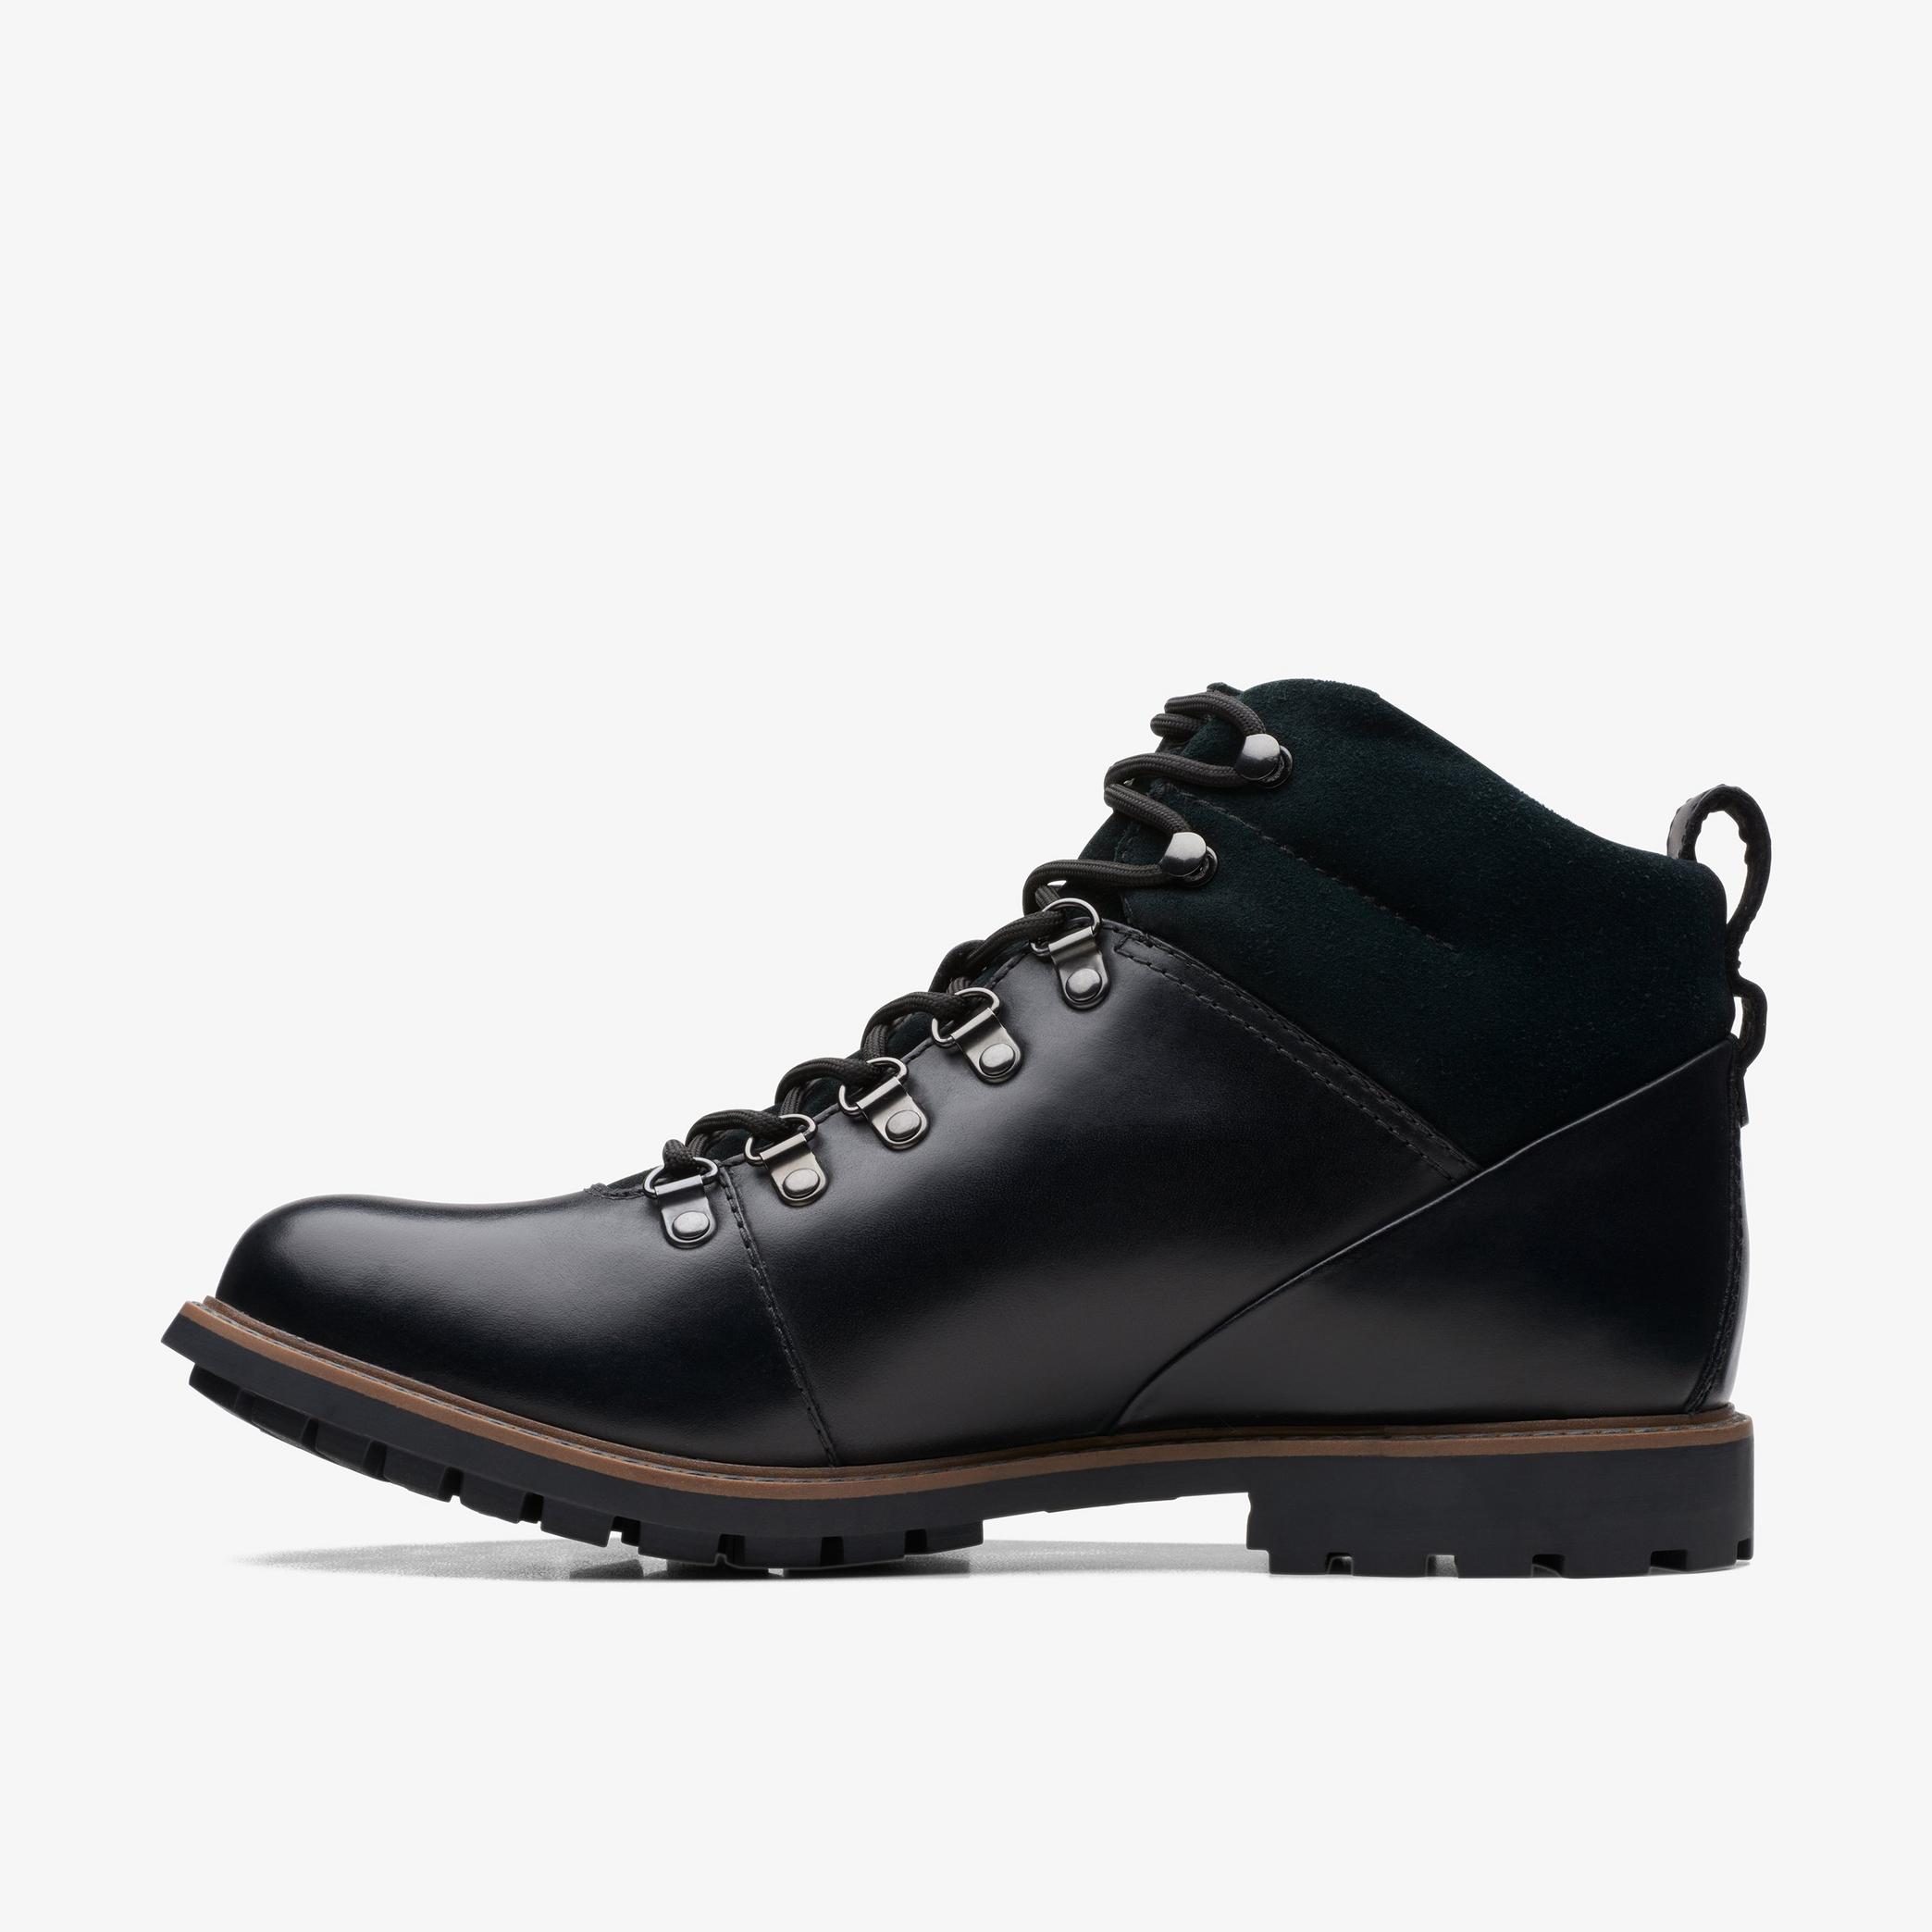 Westcombe Hi Waterproof Black Warmlined Leather Ankle Boots, view 2 of 6